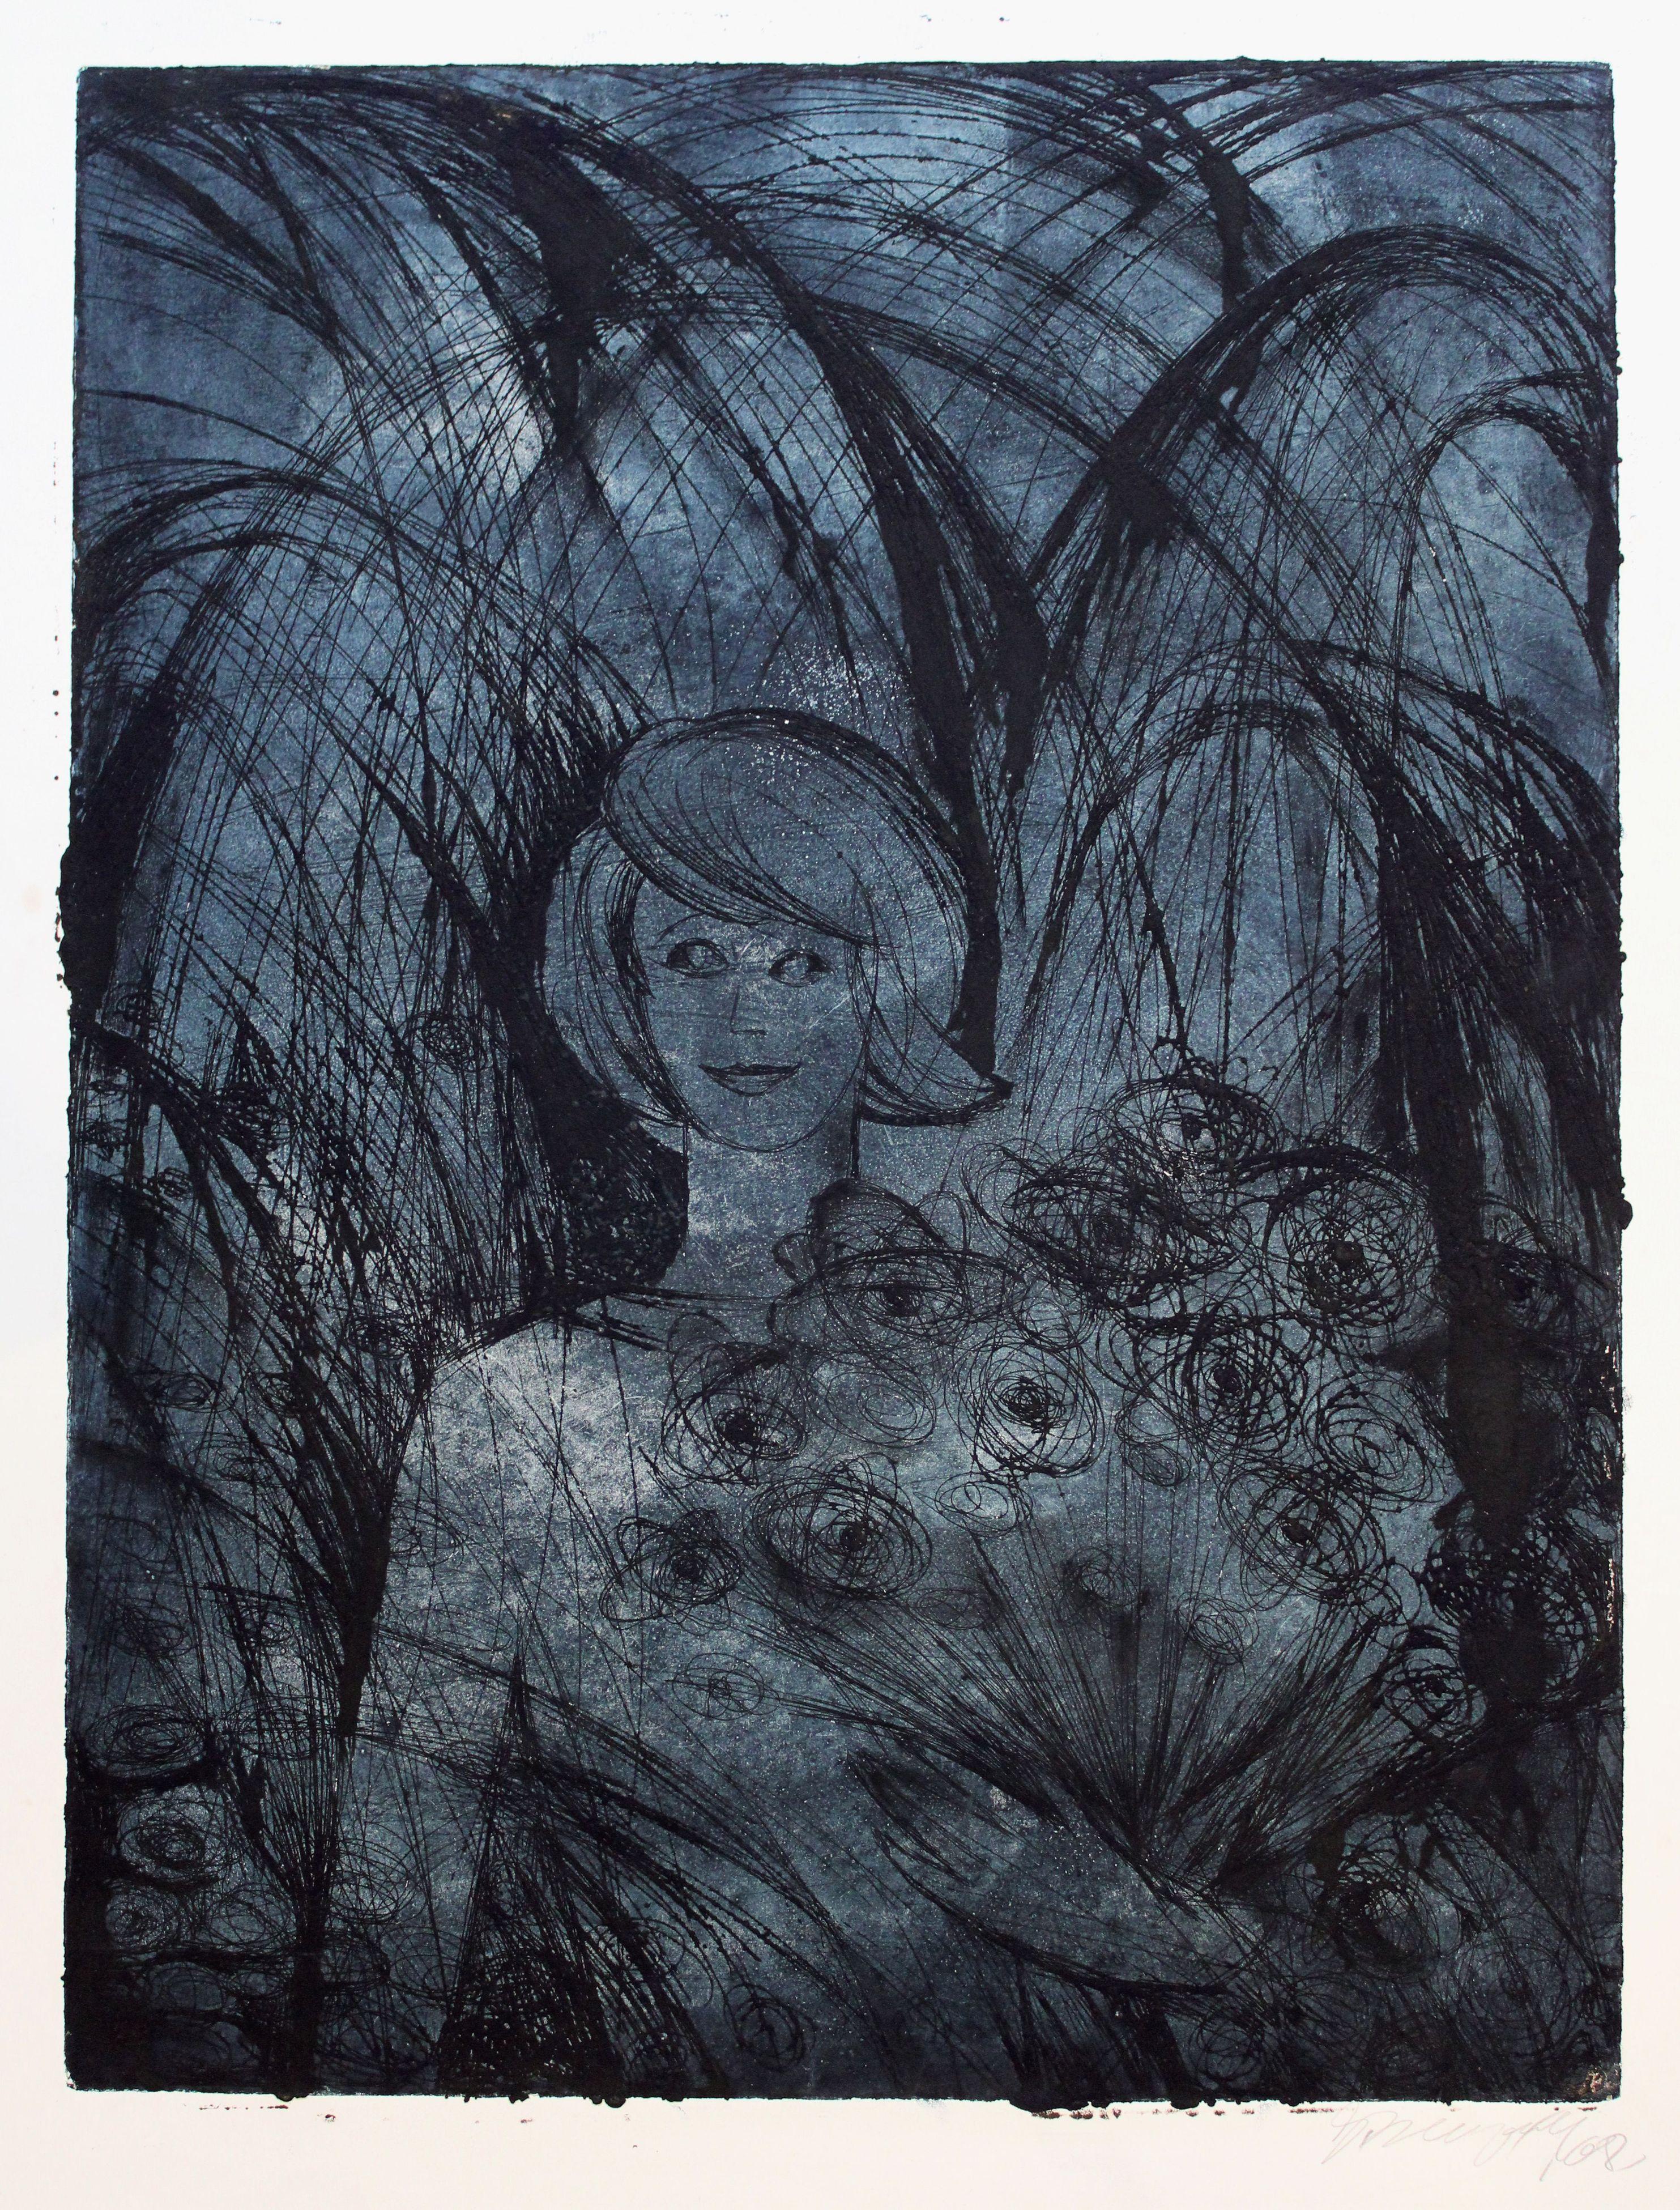 Girl with flowers. 1968, paper, etching, 68x51 cm